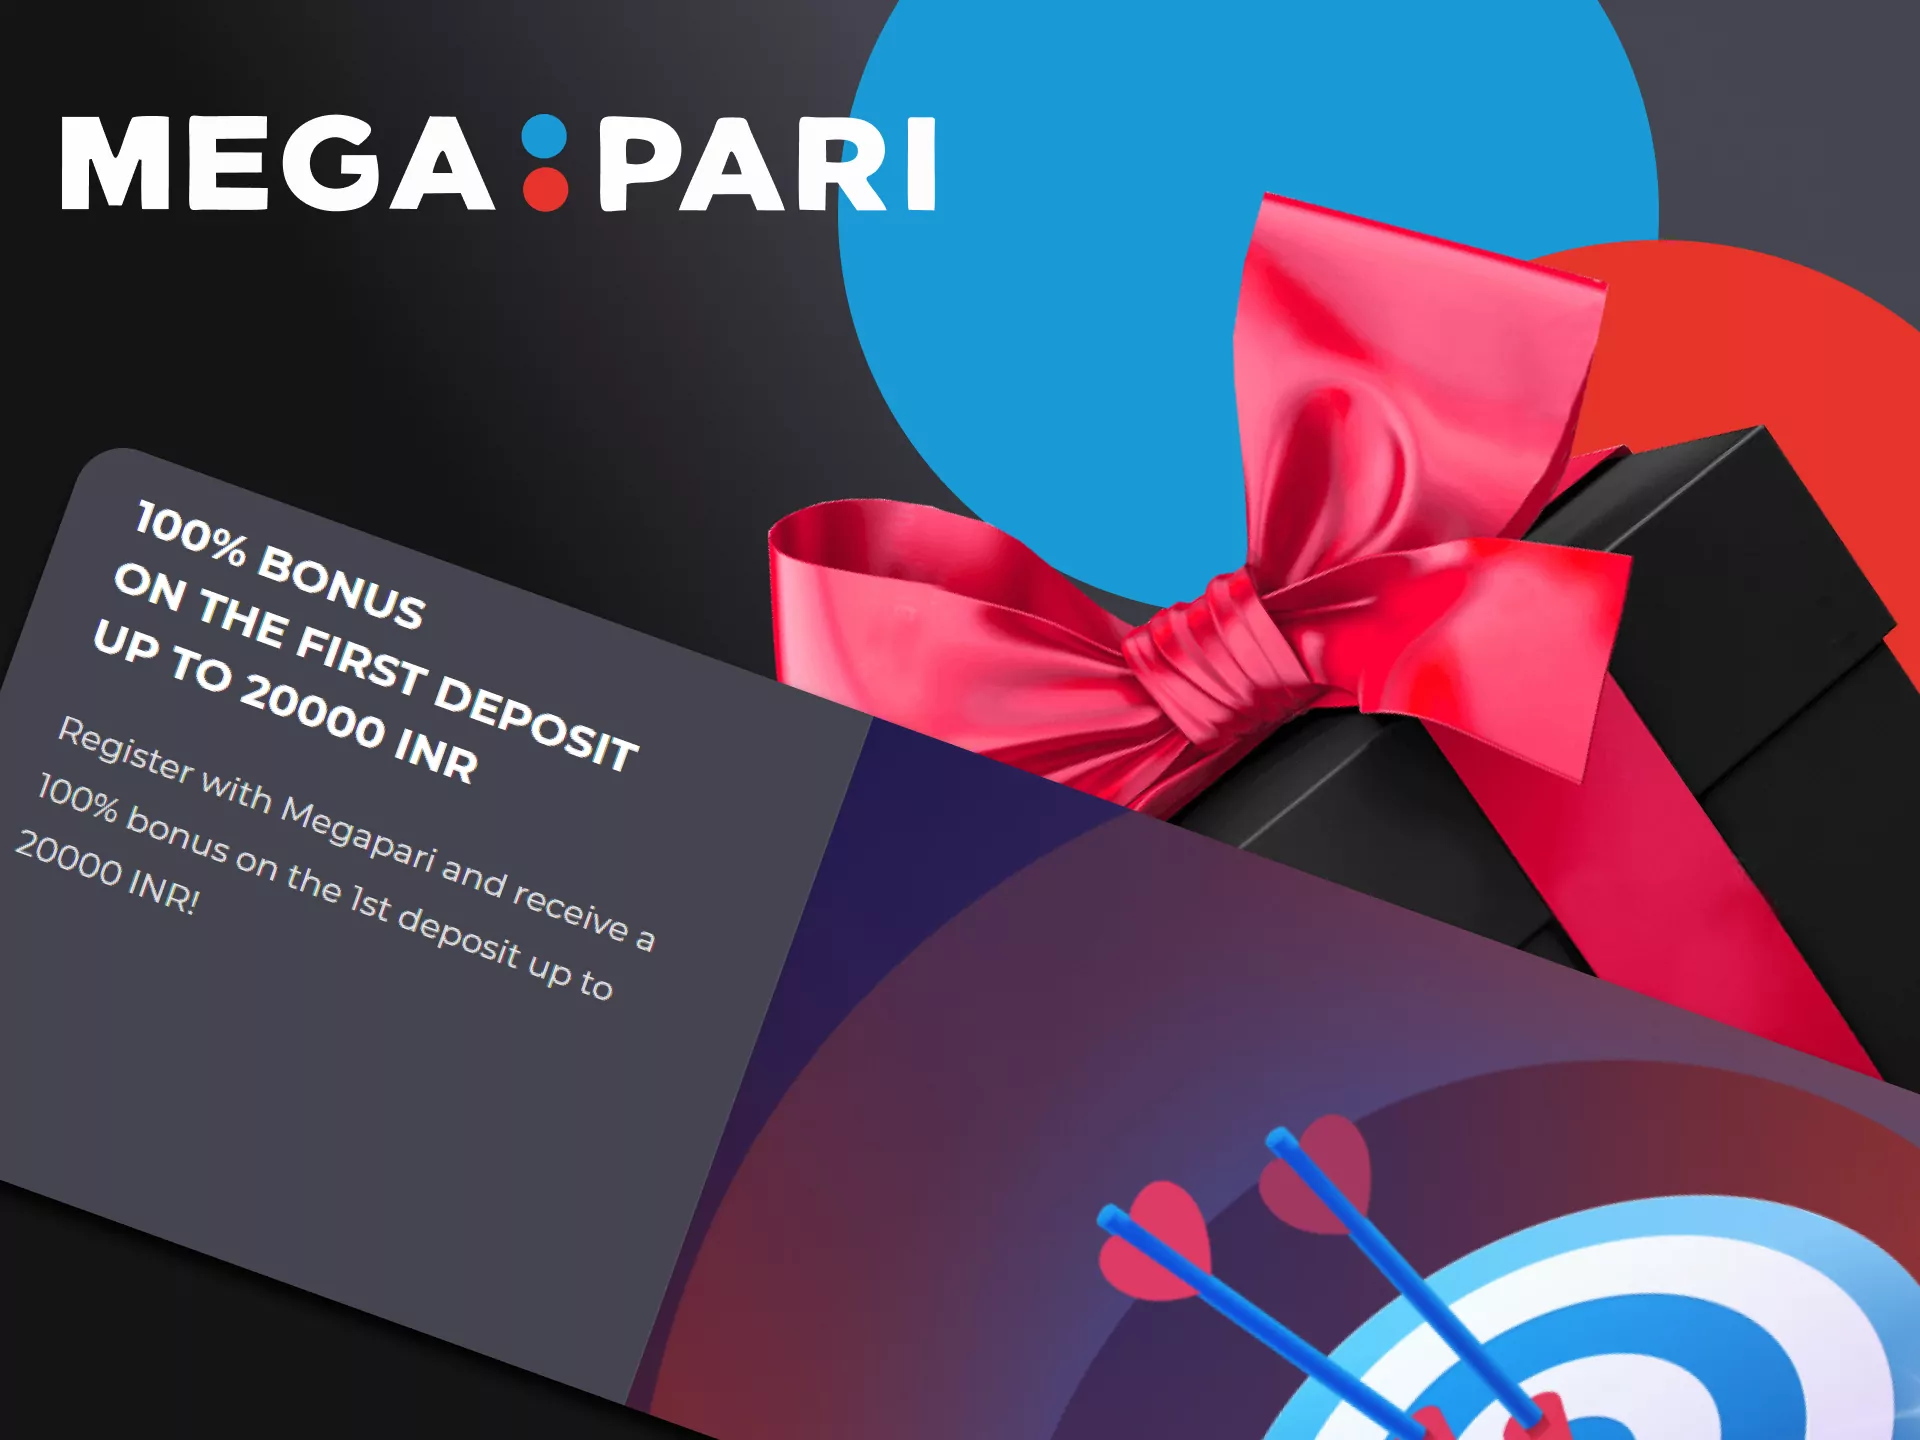 Get a welcome bonus for betting on TOTO from Megapari.